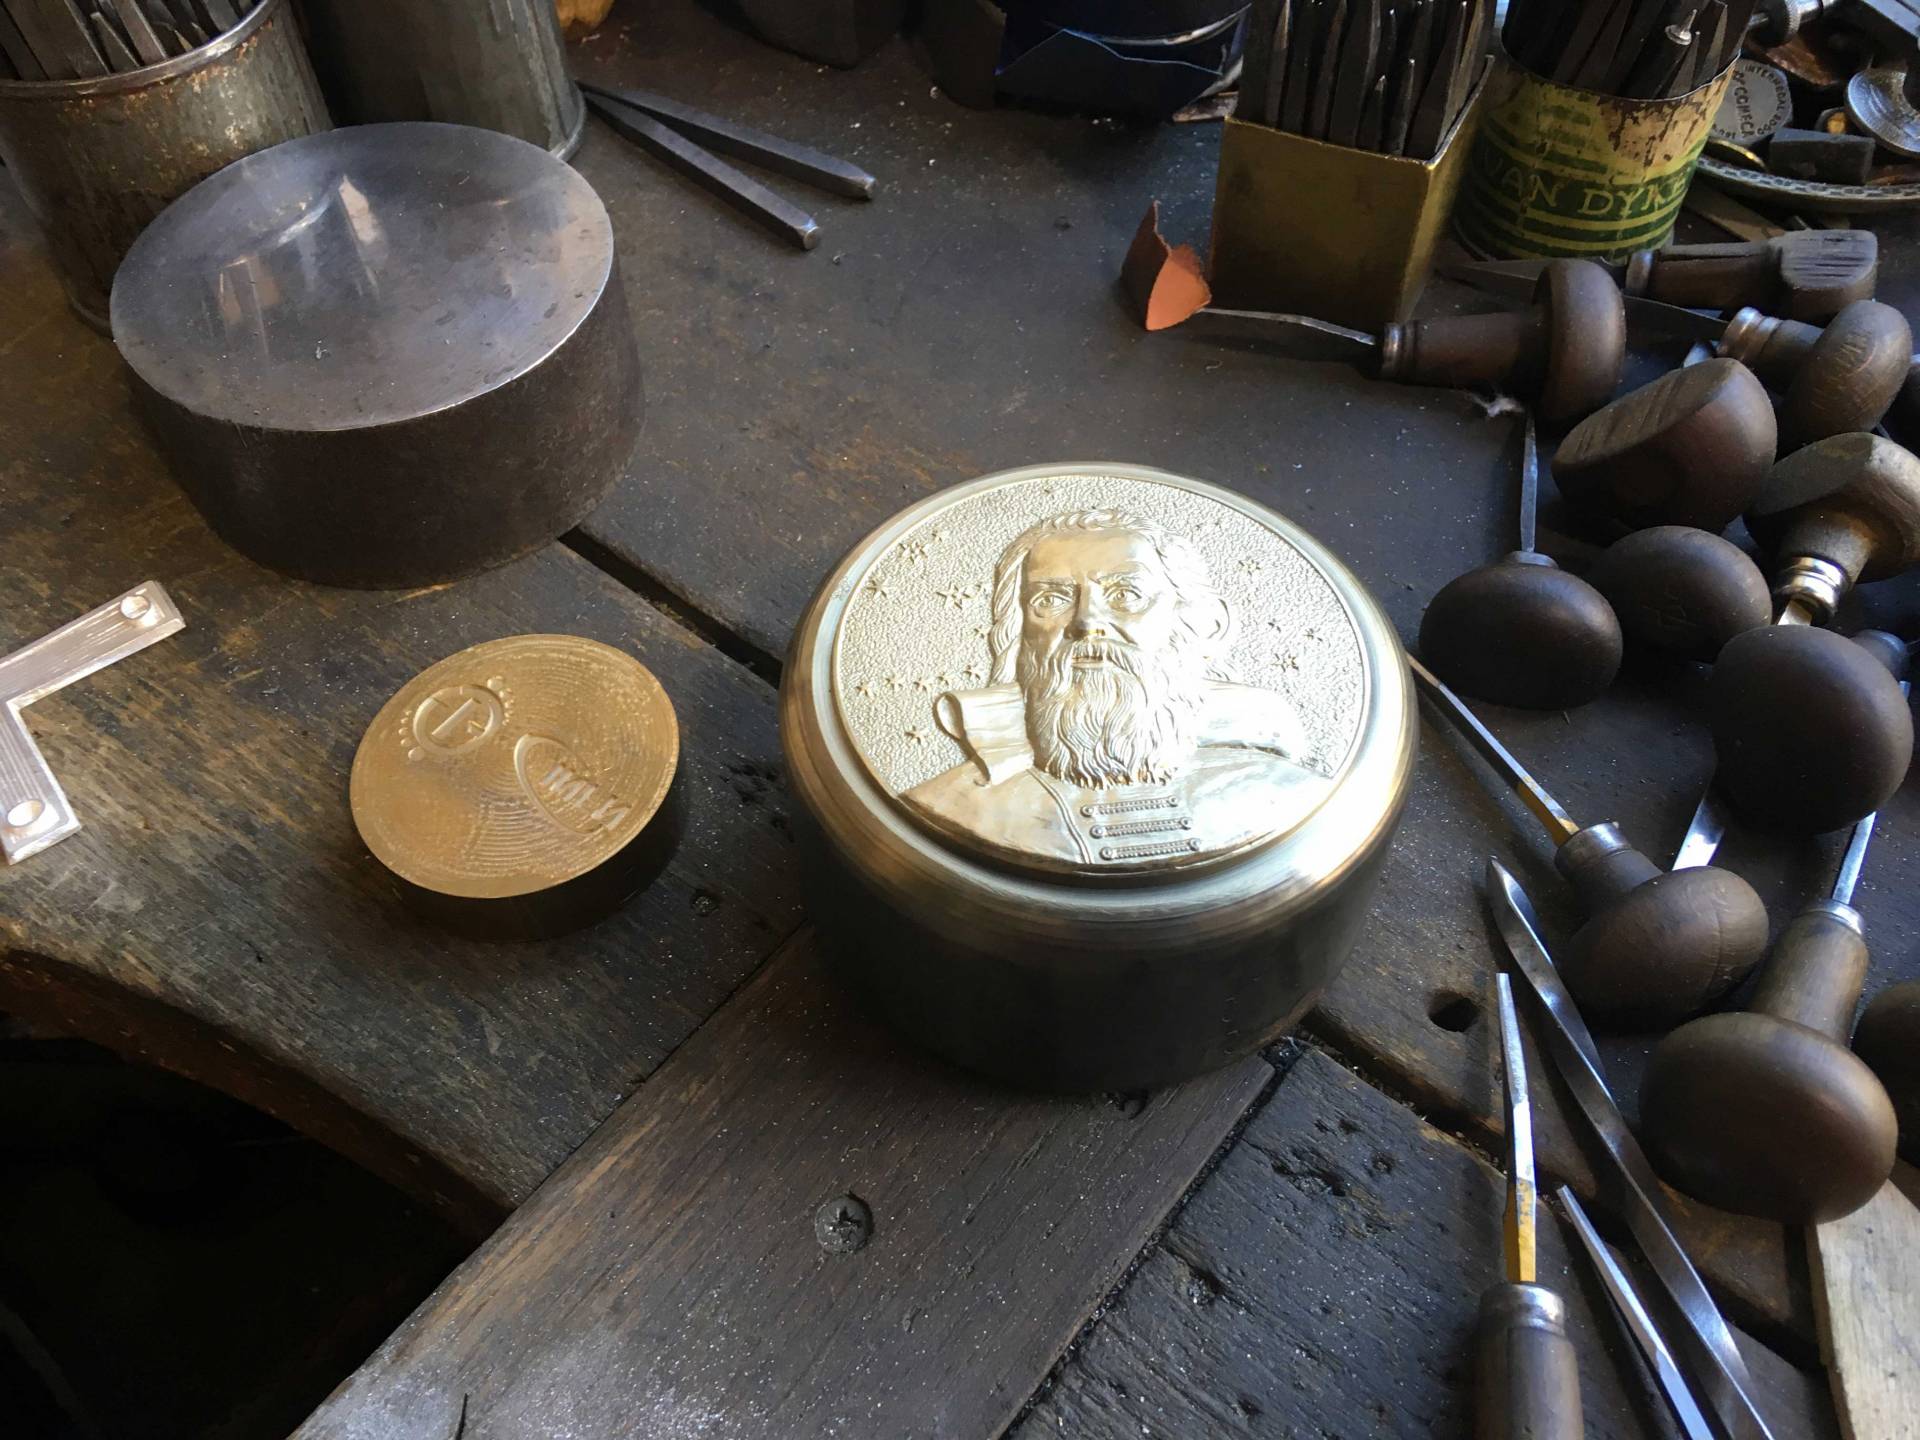 Galileo Medal surrounded by artisan tools